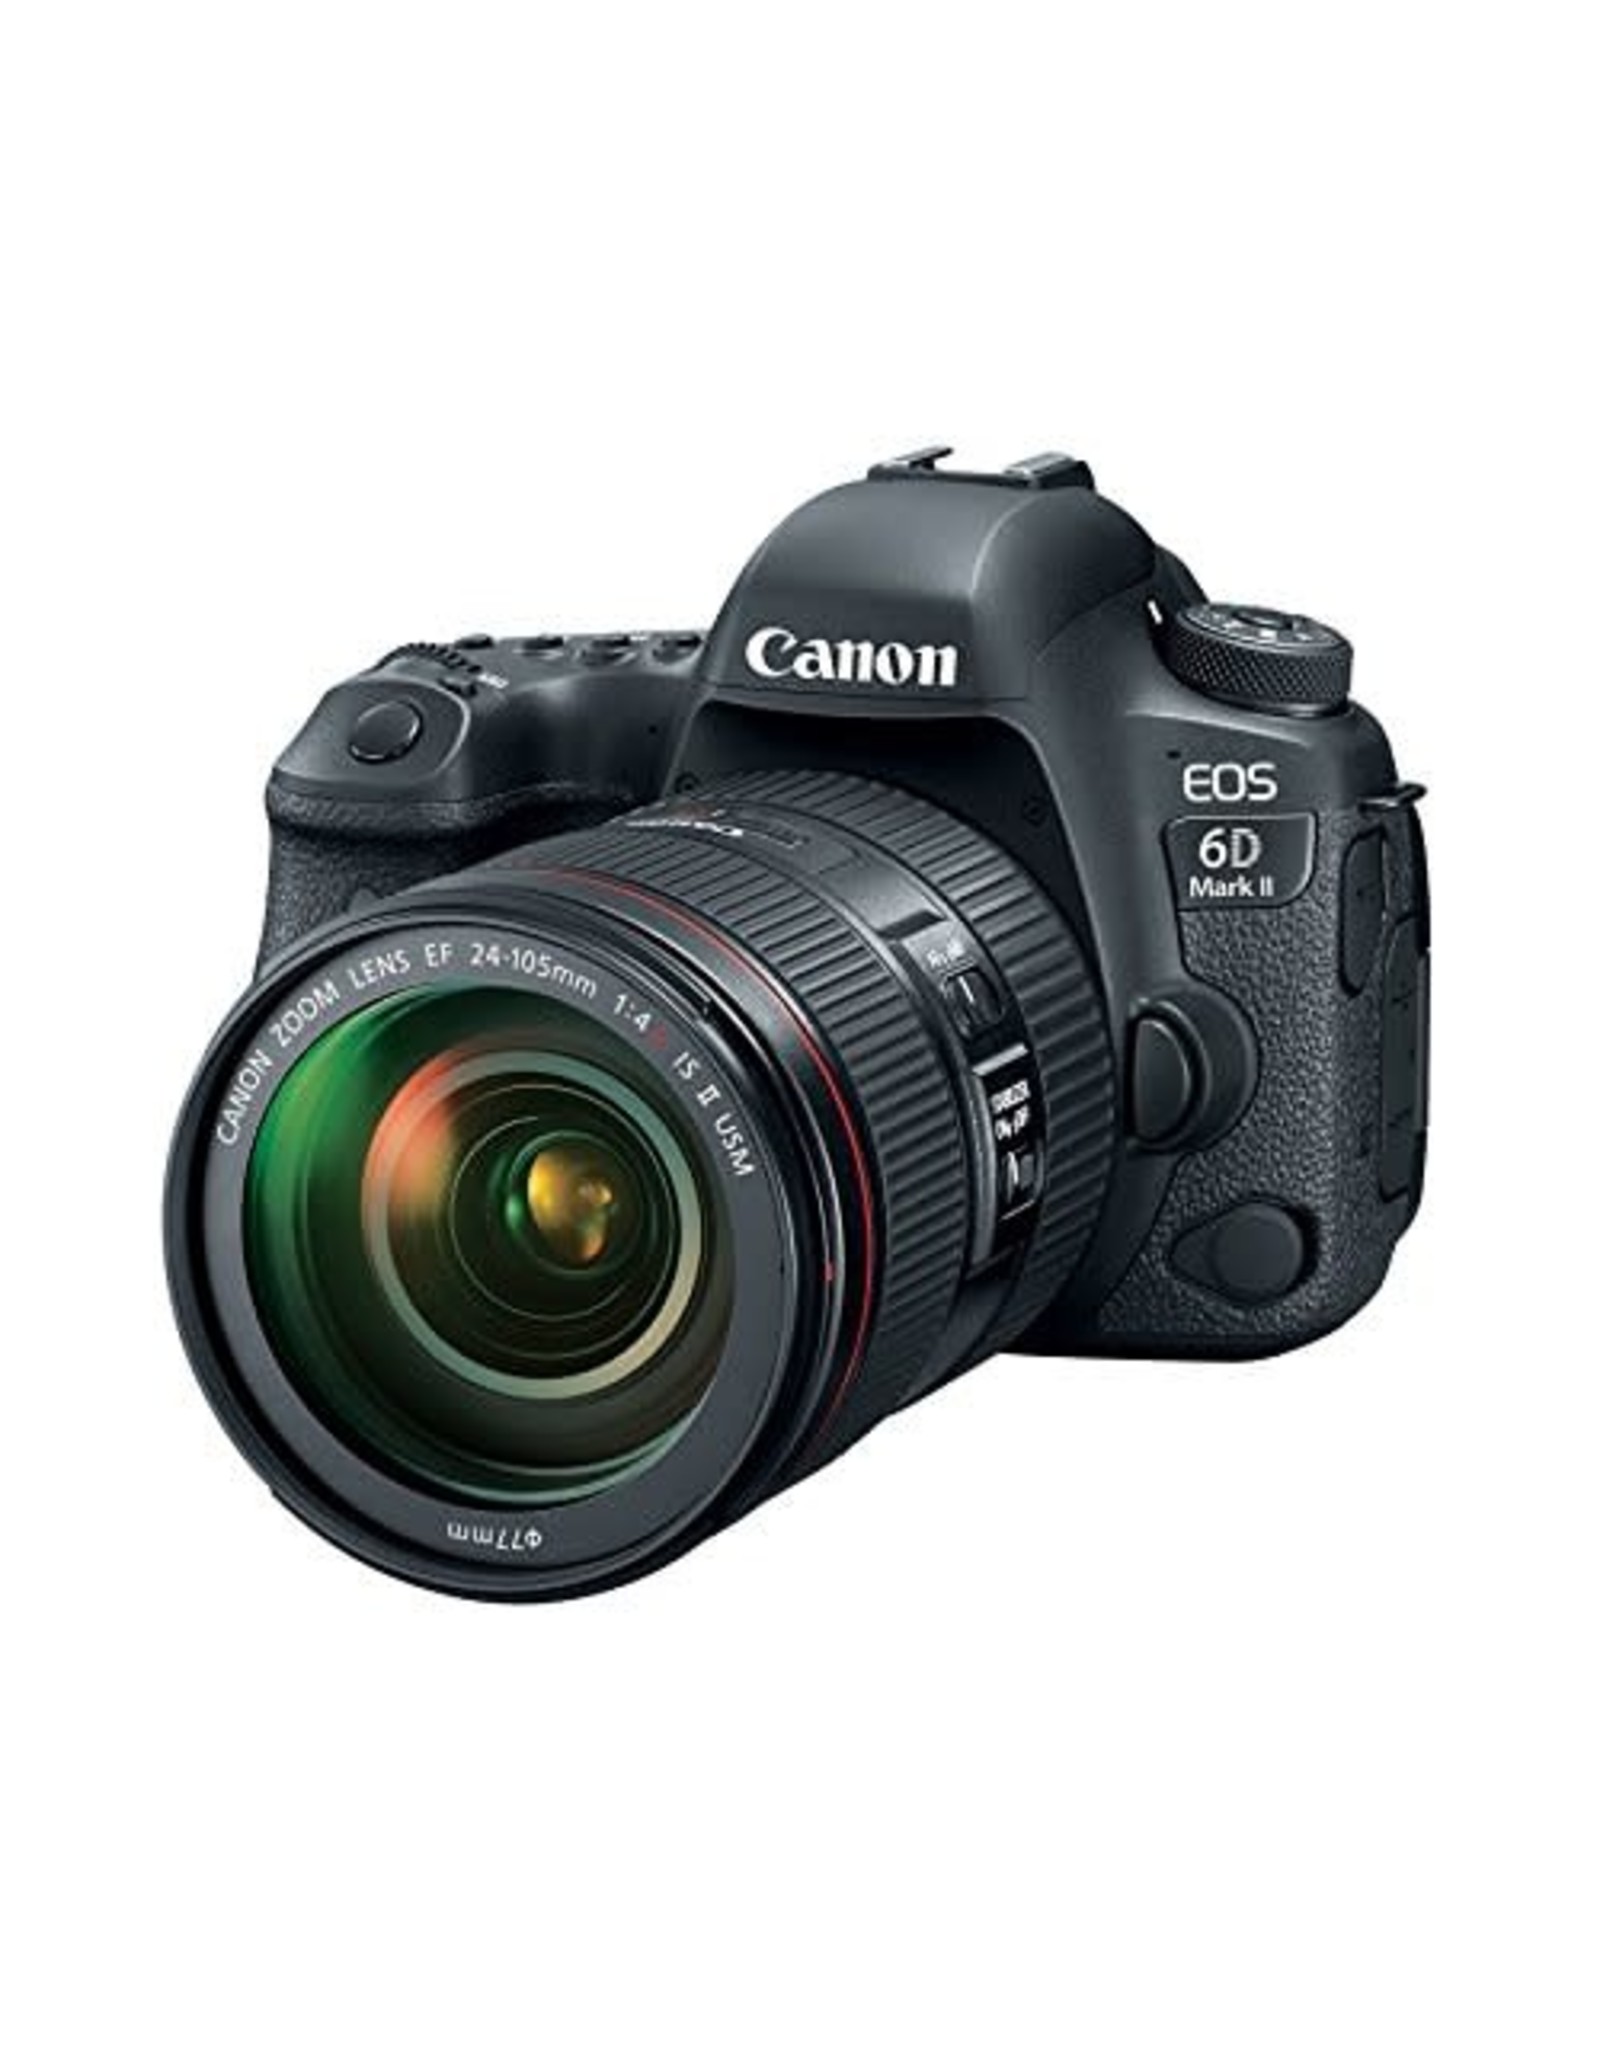 Canon Canon EOS 6D Mark II DSLR Camera with 24-105mm f/3.5-5.6 Lens